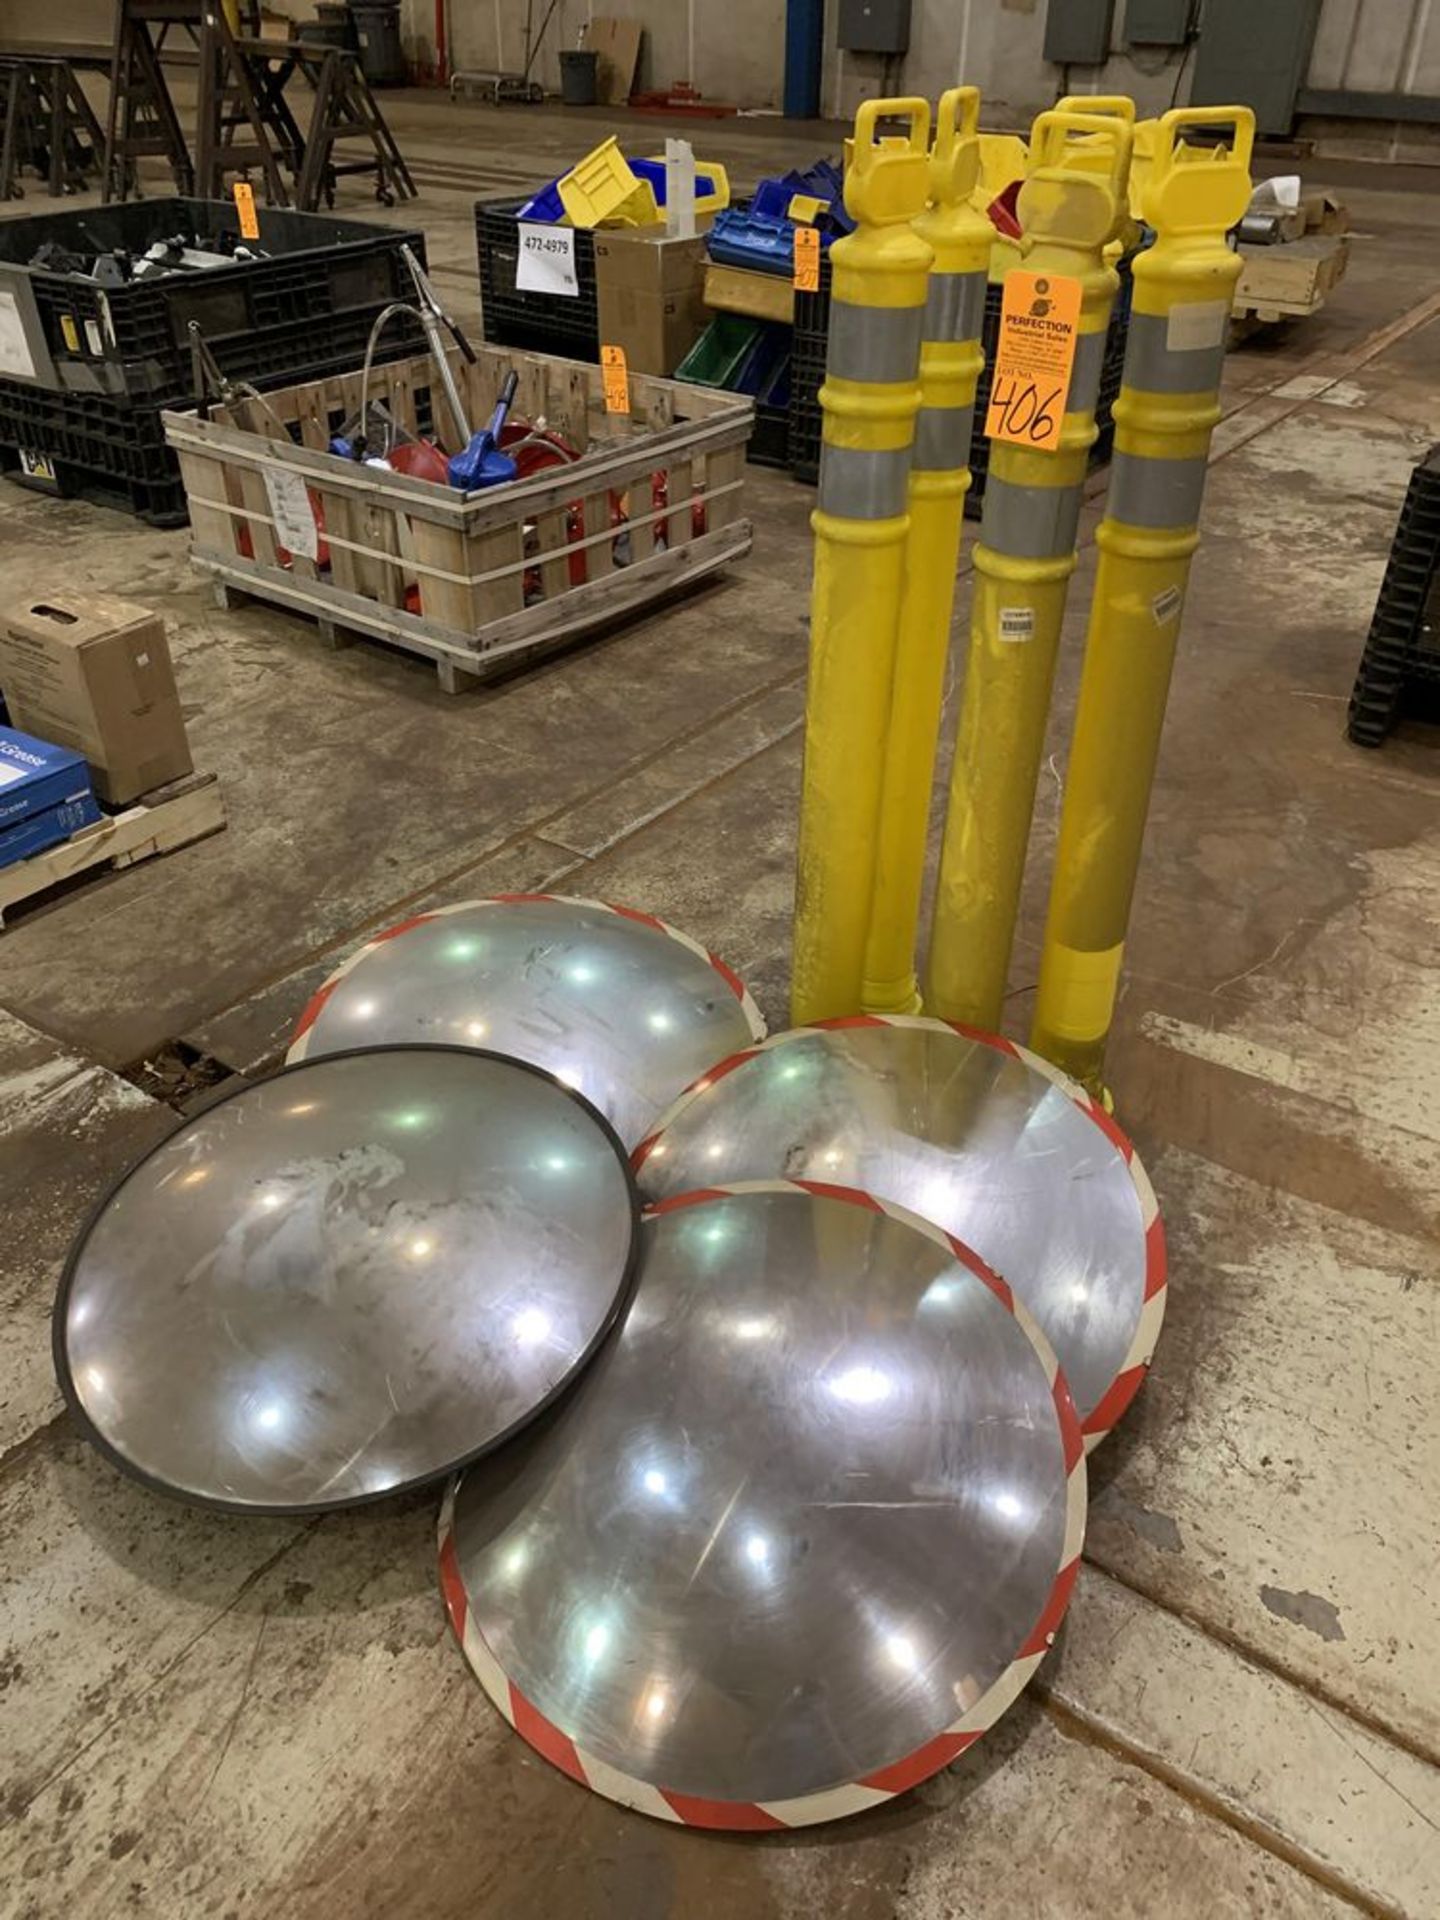 Lot of Safety Cones and Plant Mirrors